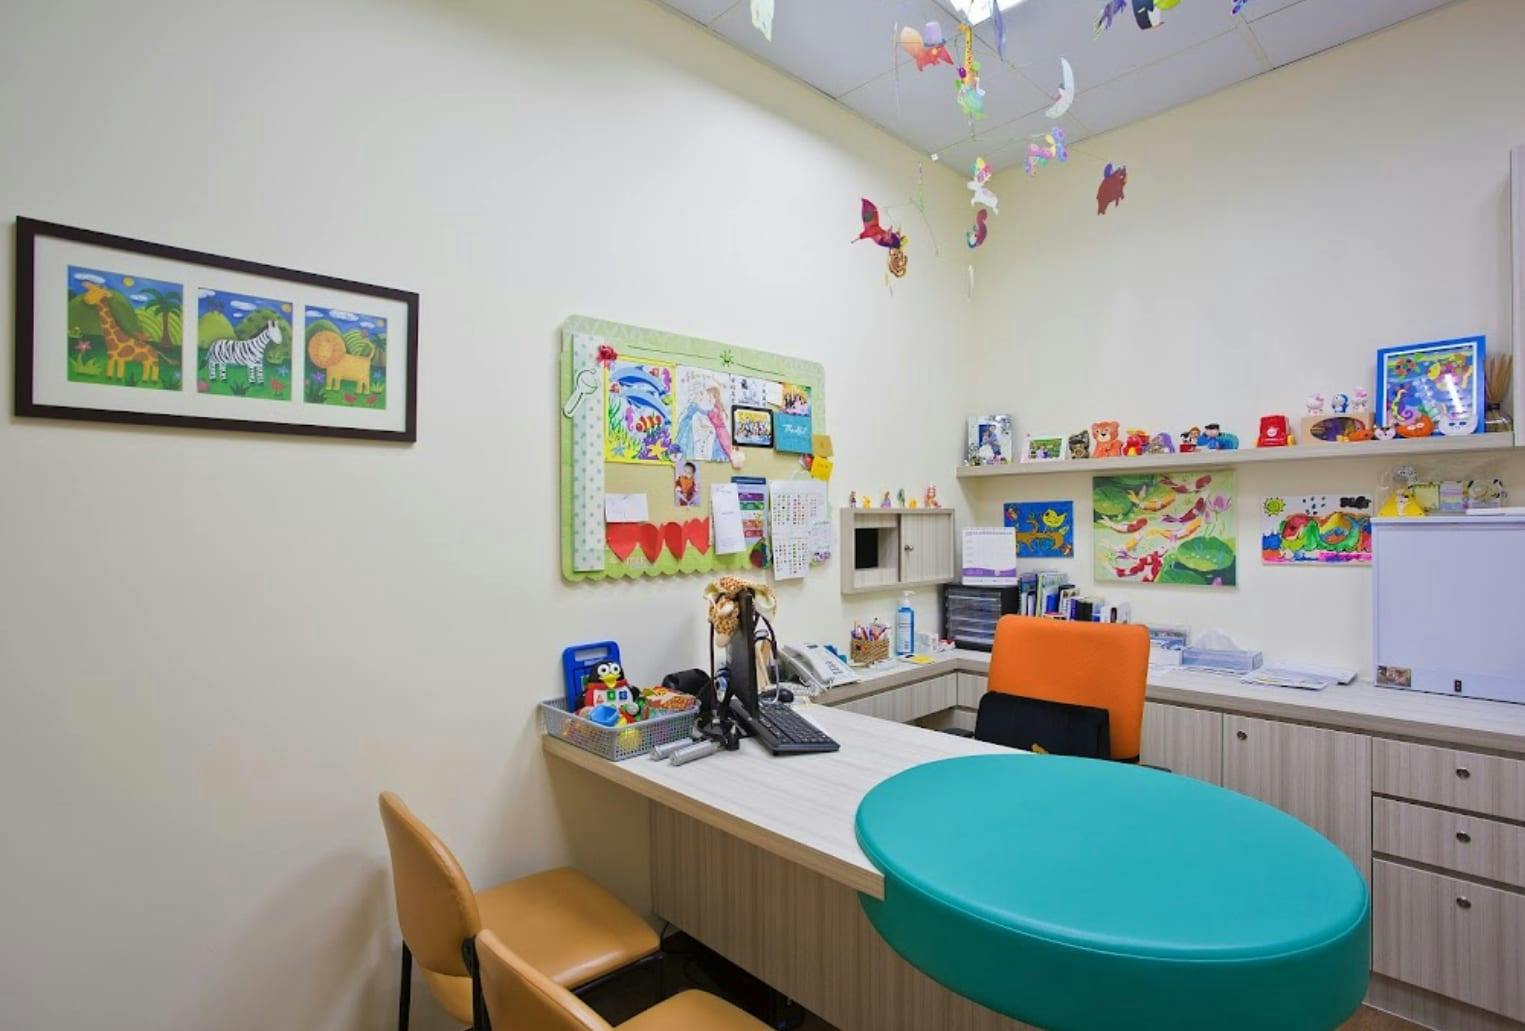 photo for Thomson Paediatric Centre (Parkway Parade)